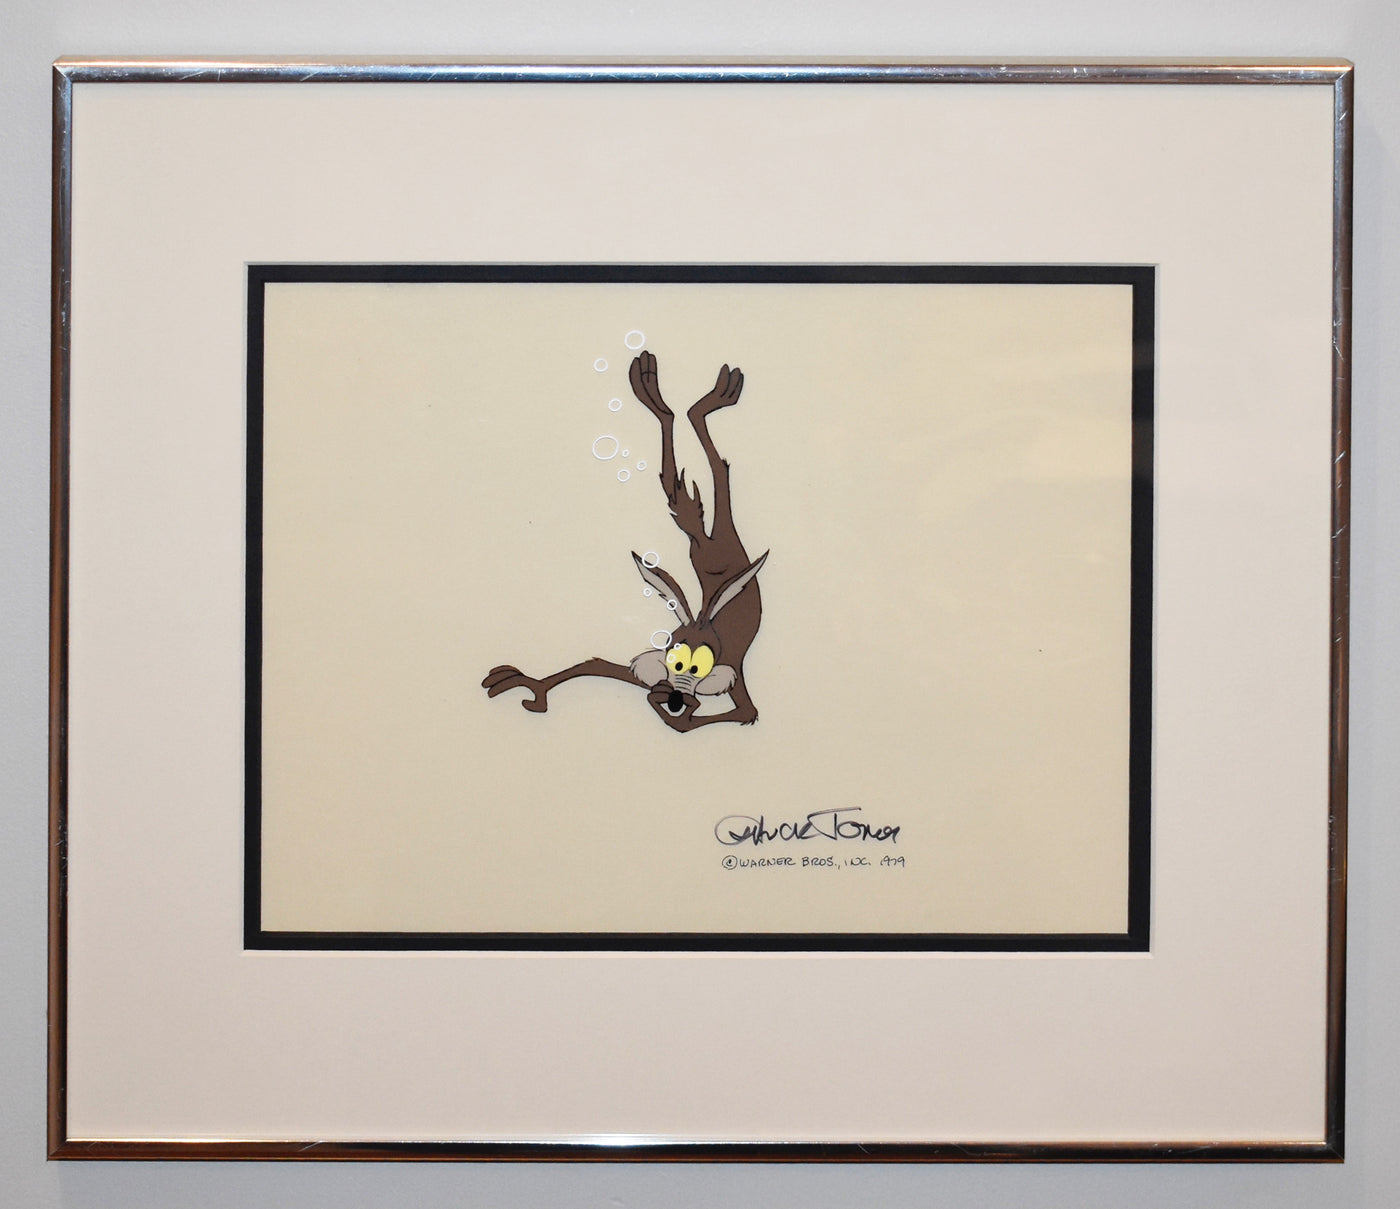 Original Warner Brothers Production Cel Featuring Wile E. Coyote from "Freeze Frame"